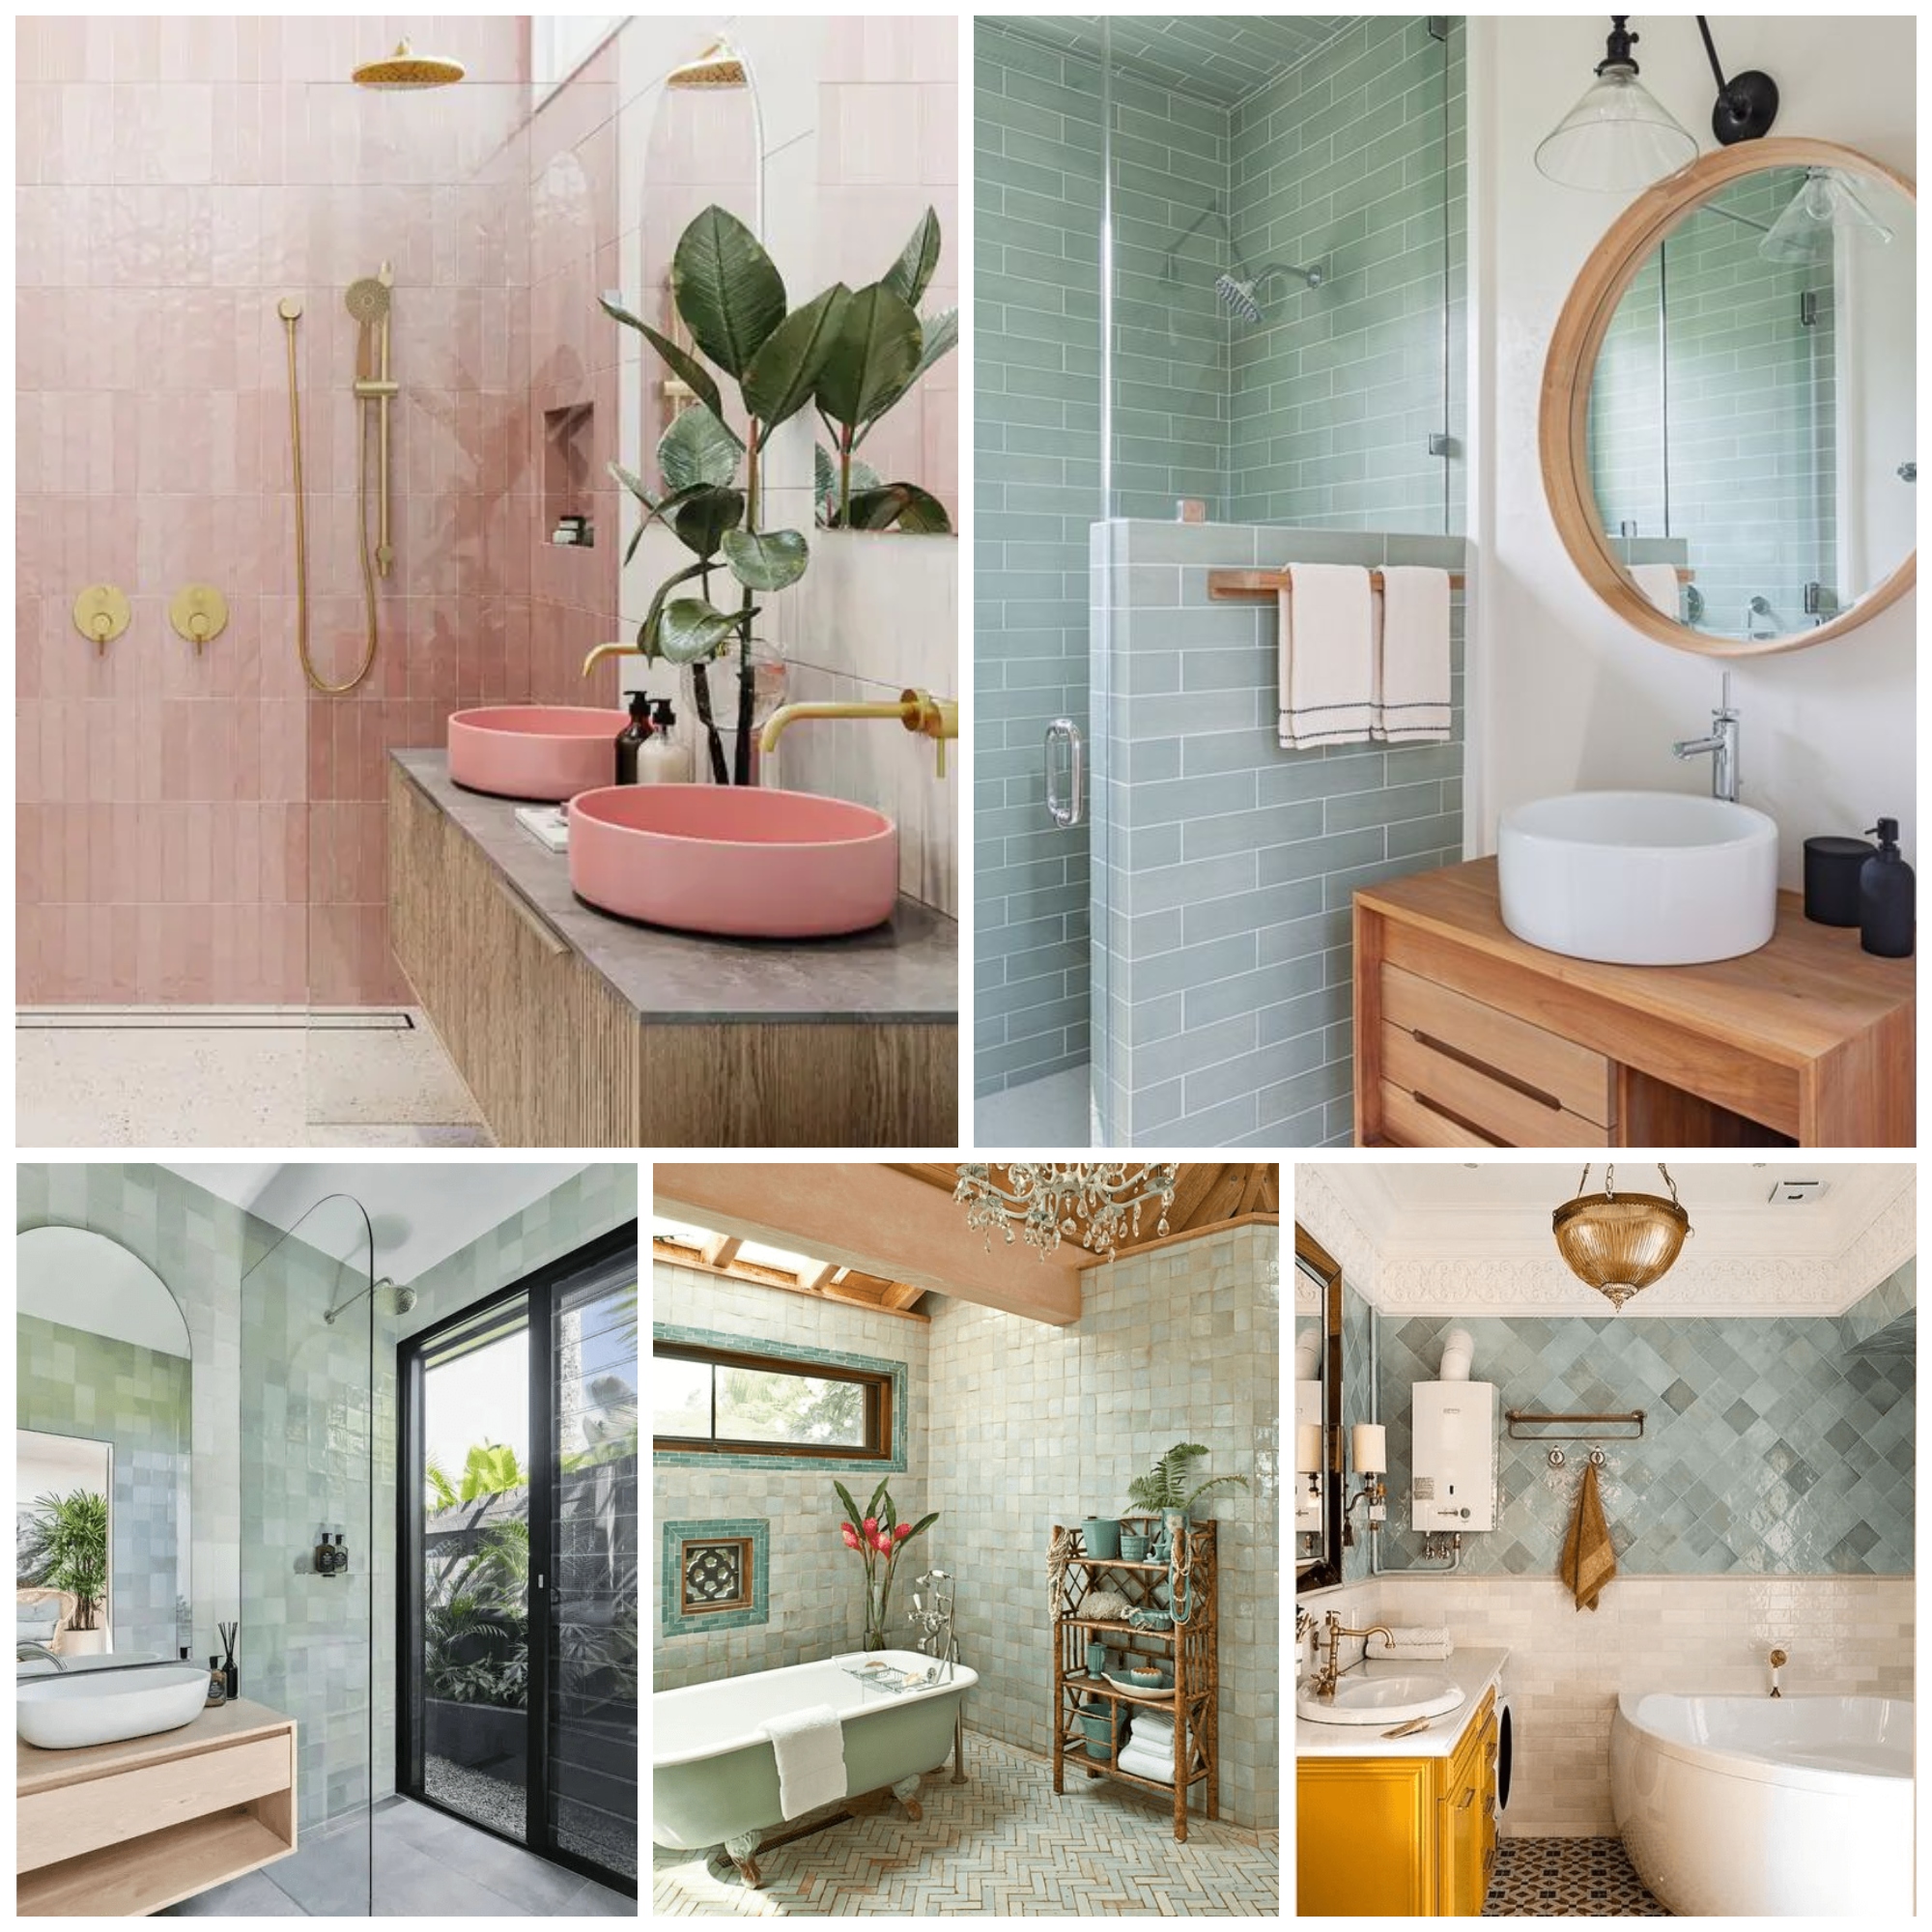 The Zellige Tile Trend Designers Can’t Seem to Get Enough Of